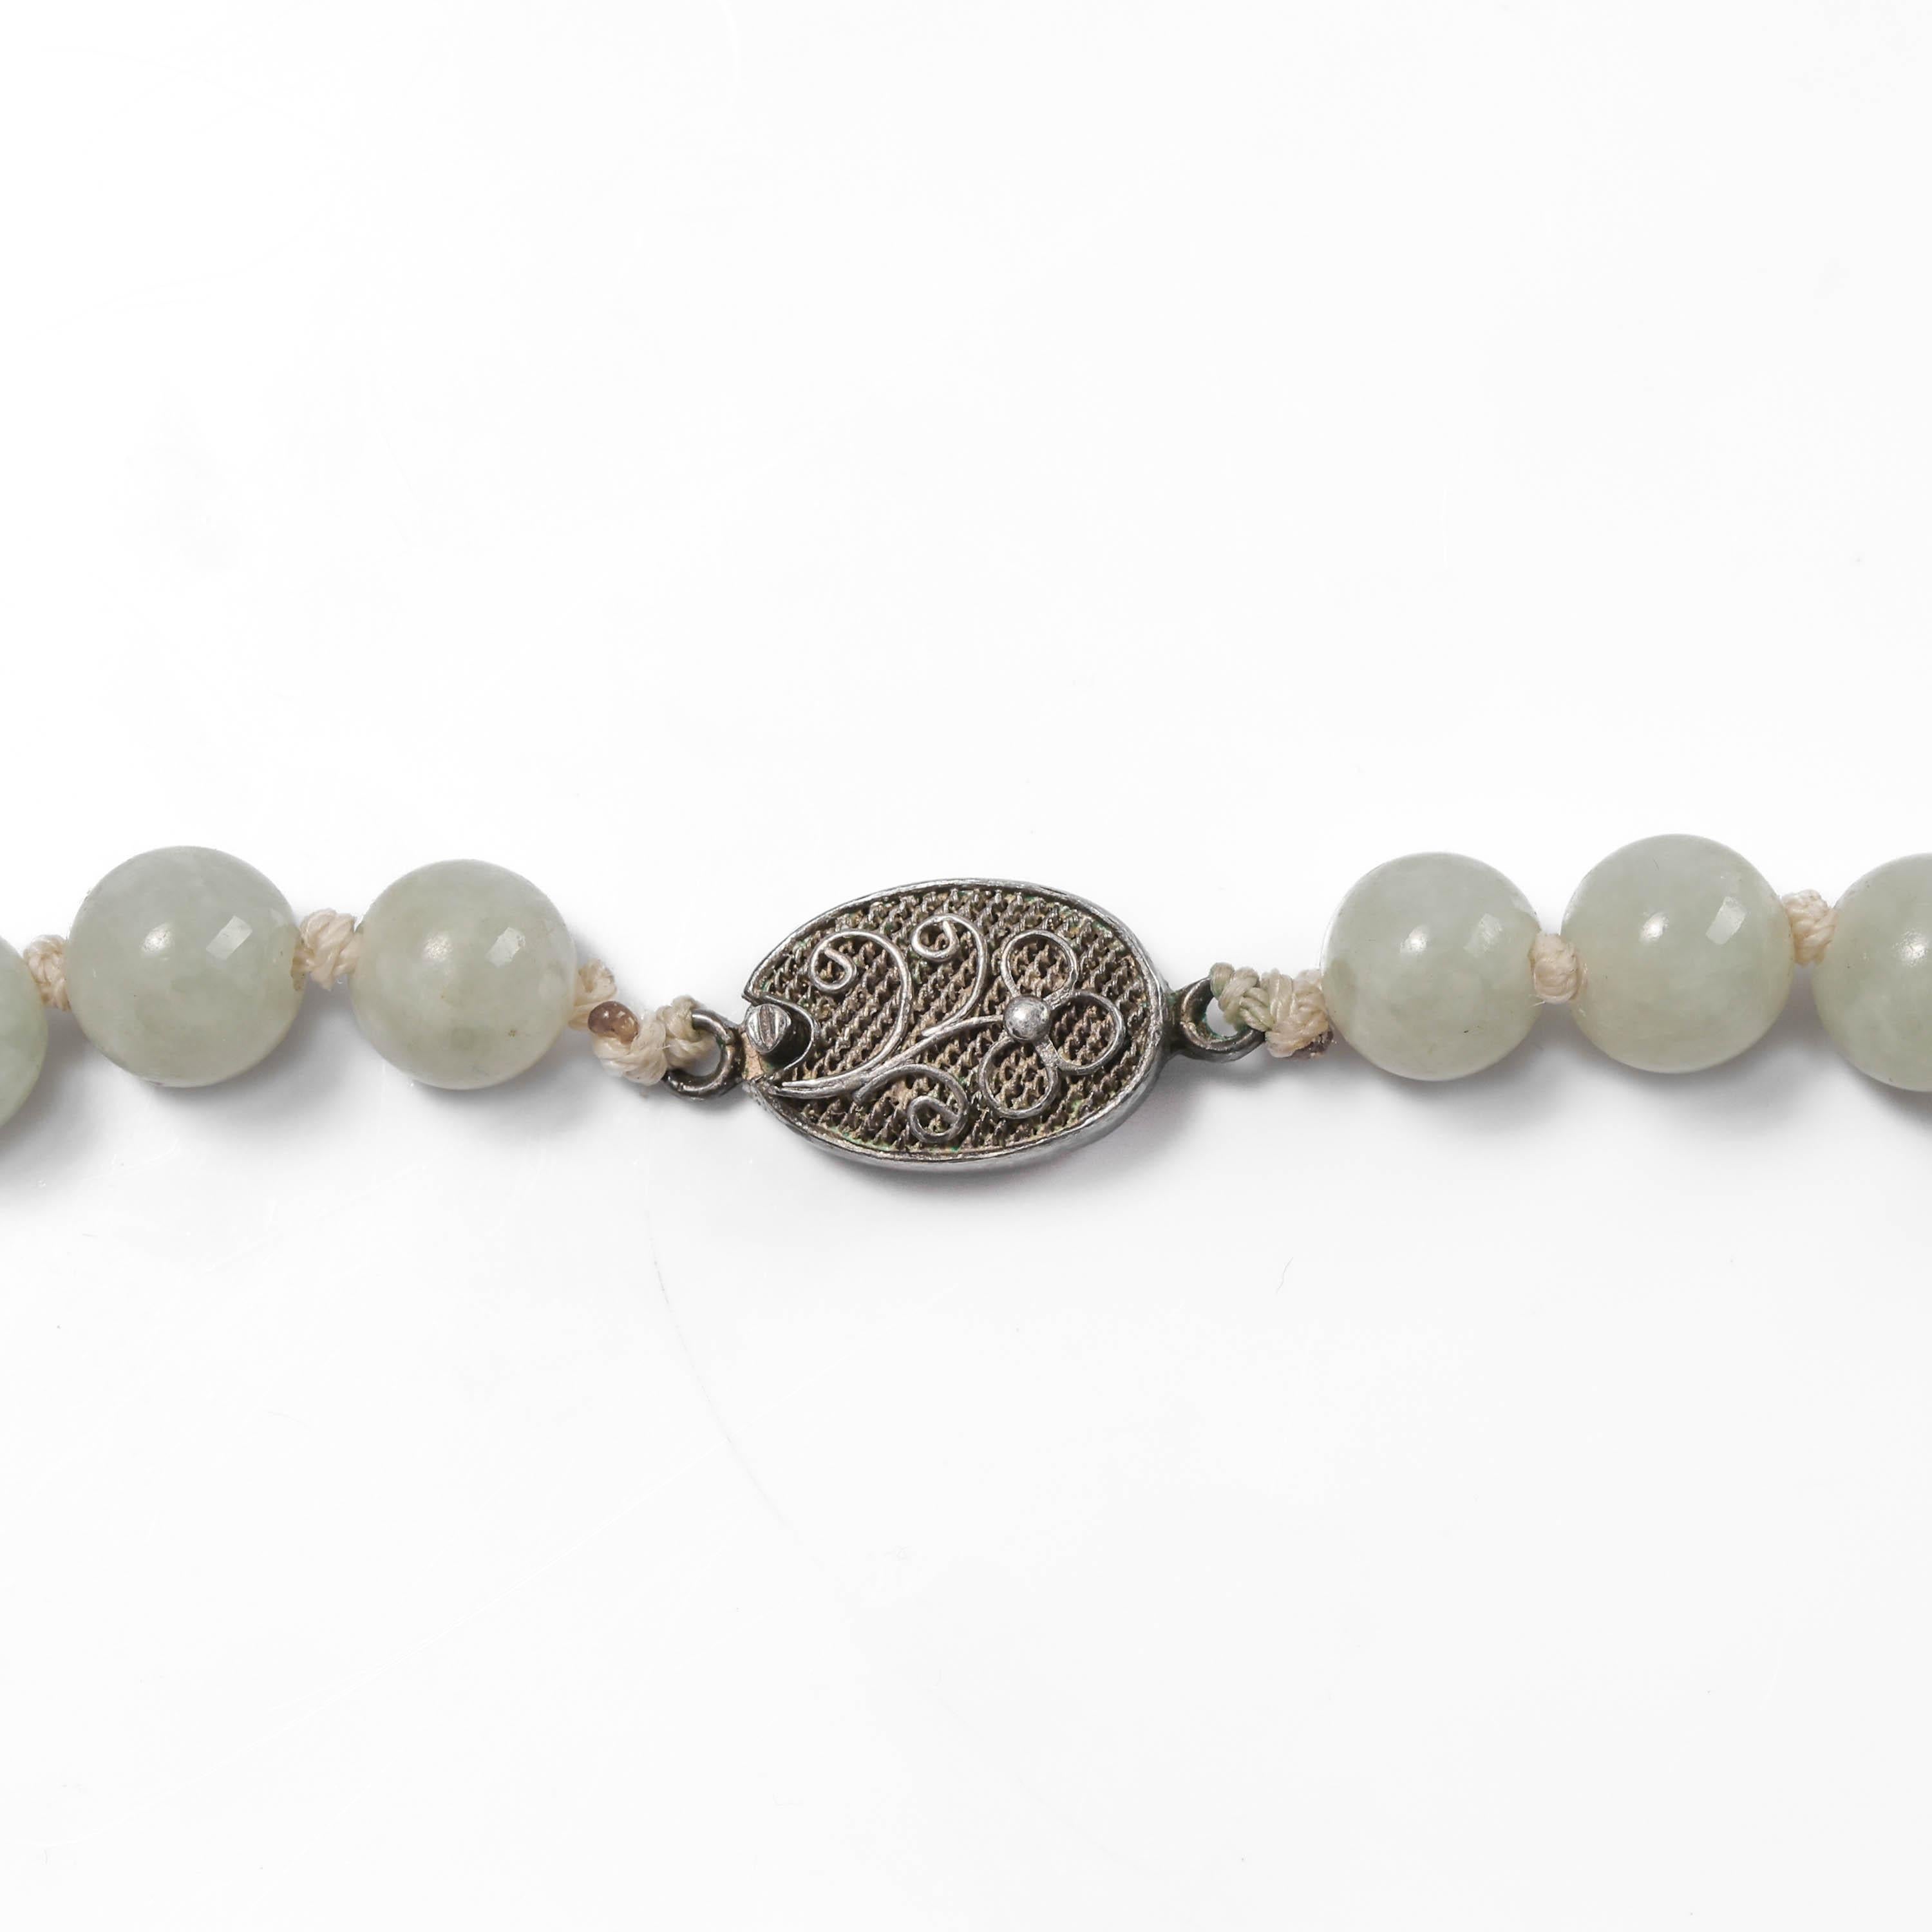 Women's or Men's Antique Jade Necklace Seemingly Made from Fog Certified Untreated 23